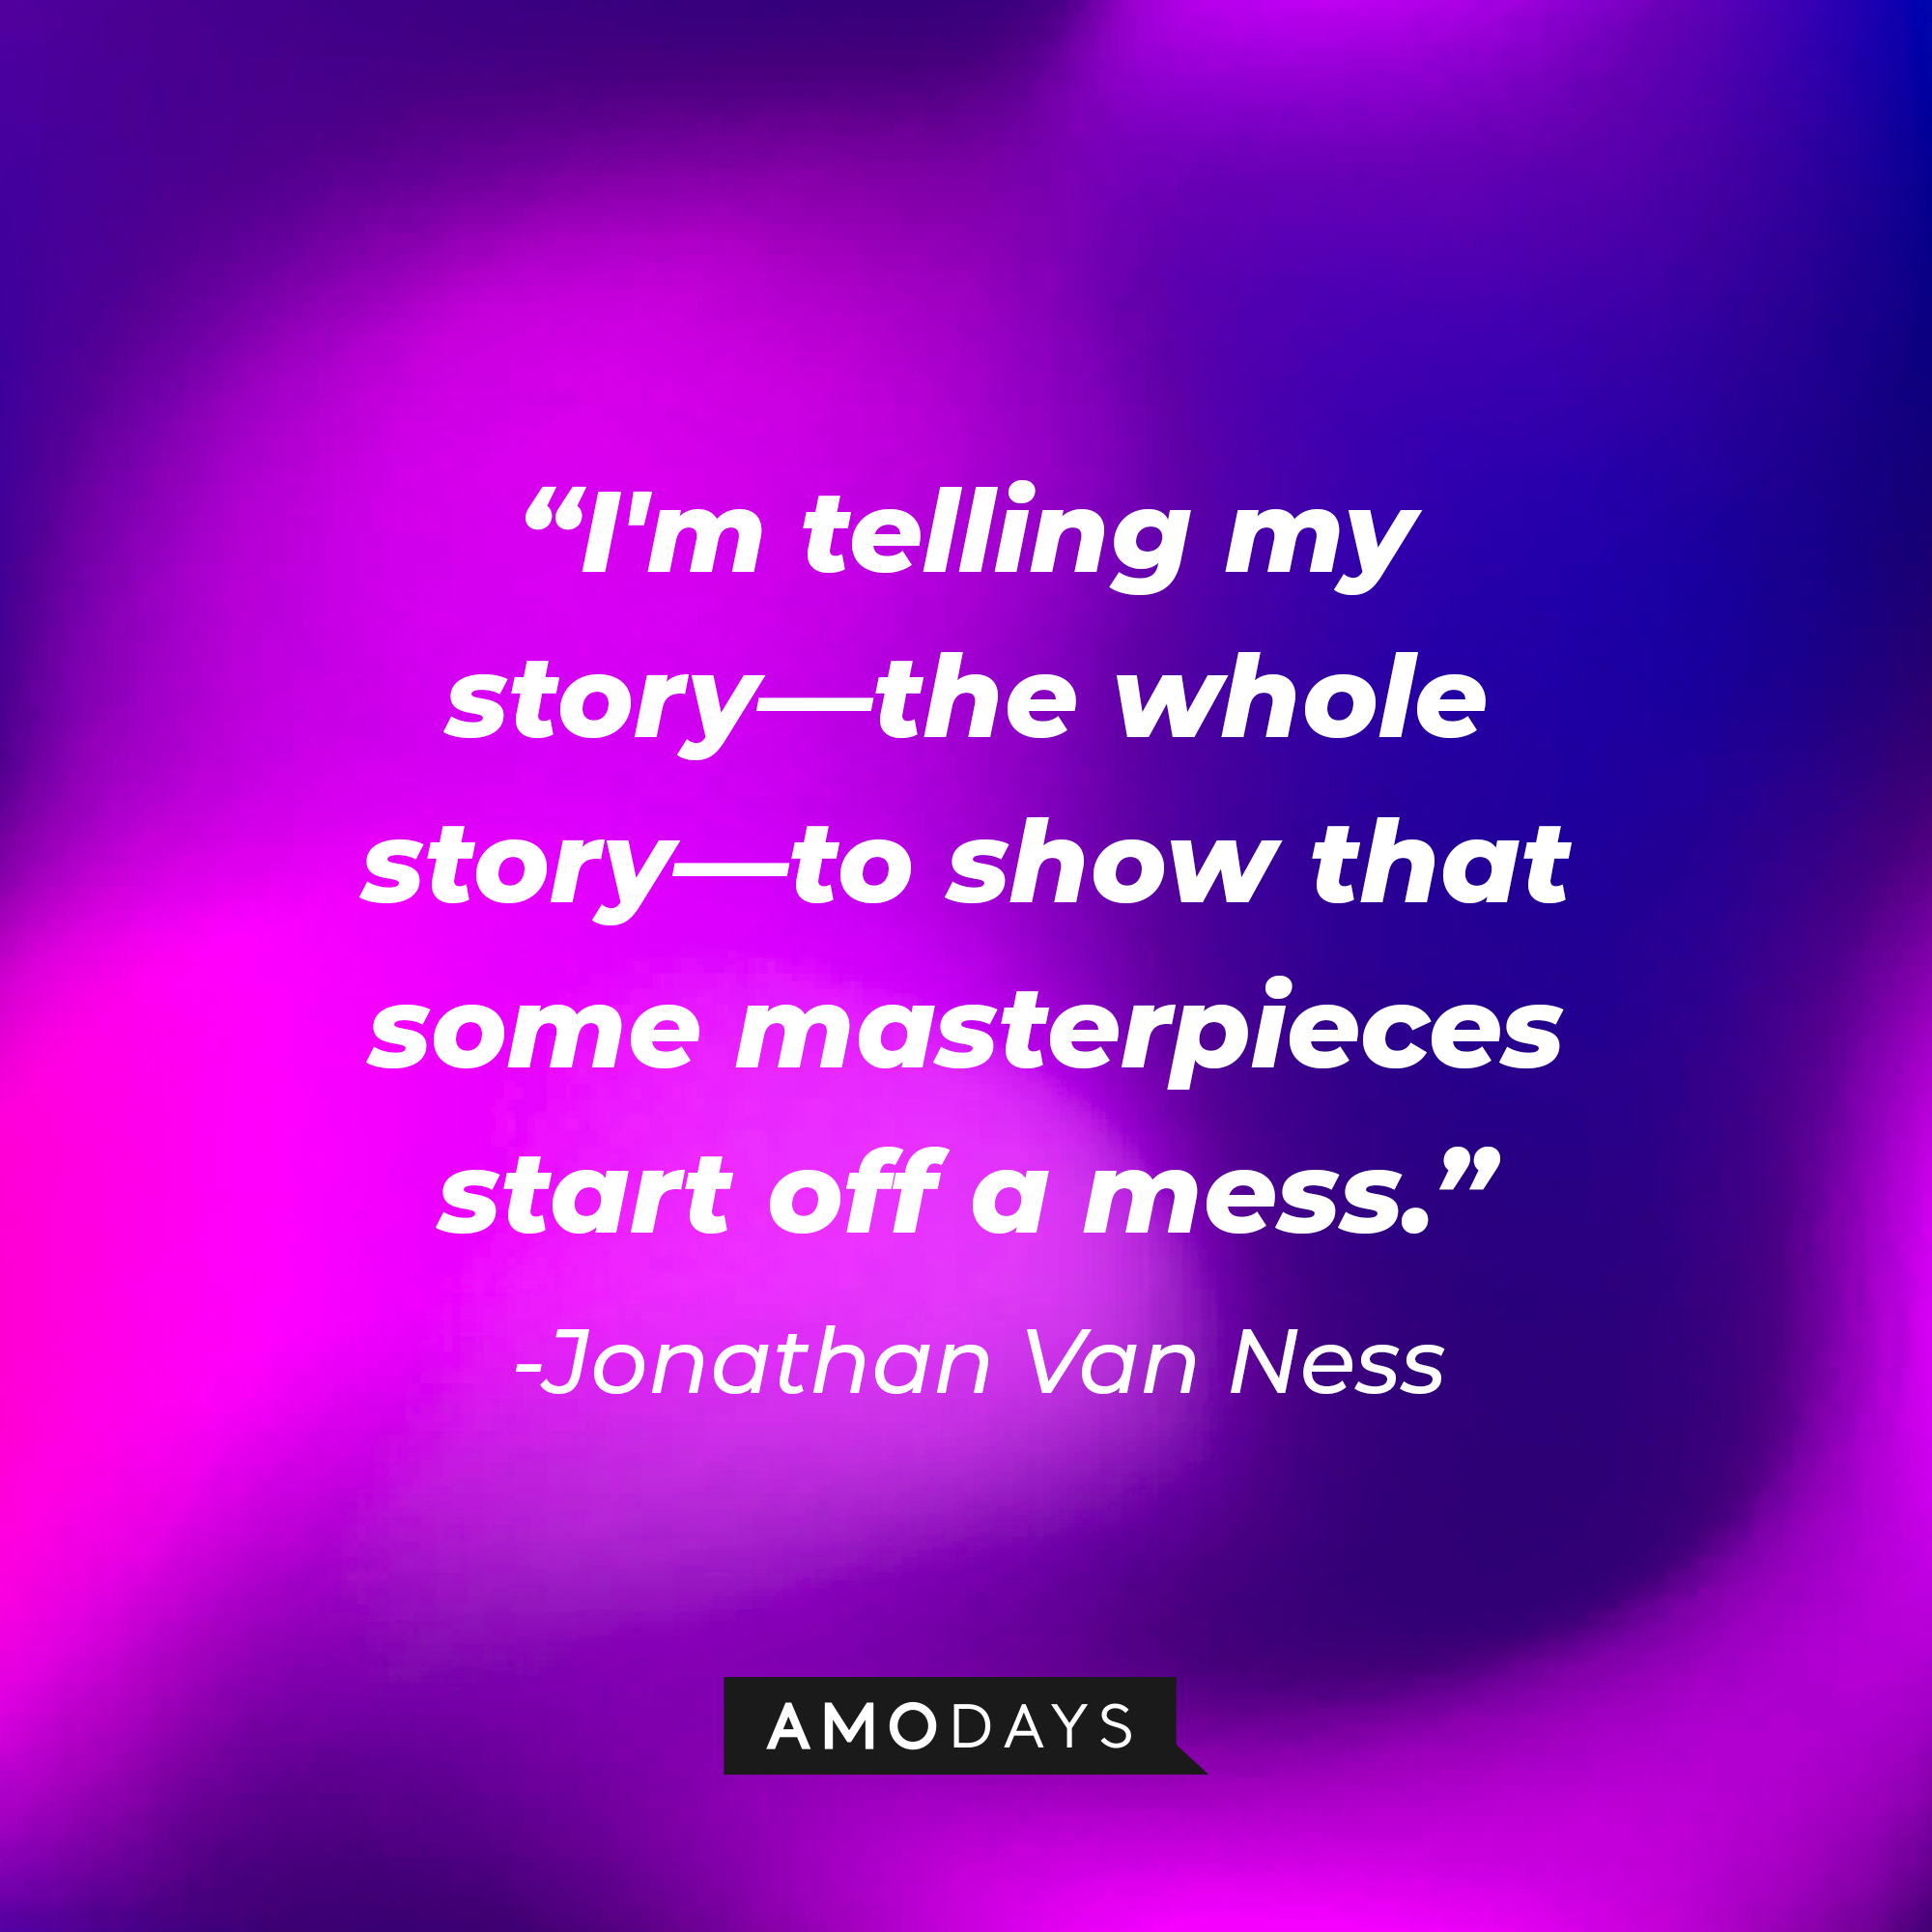 Jonathan Van Ness’ quote: "I'm telling my story—the whole story—to show that some masterpieces start off a mess." | Image: AmoDays